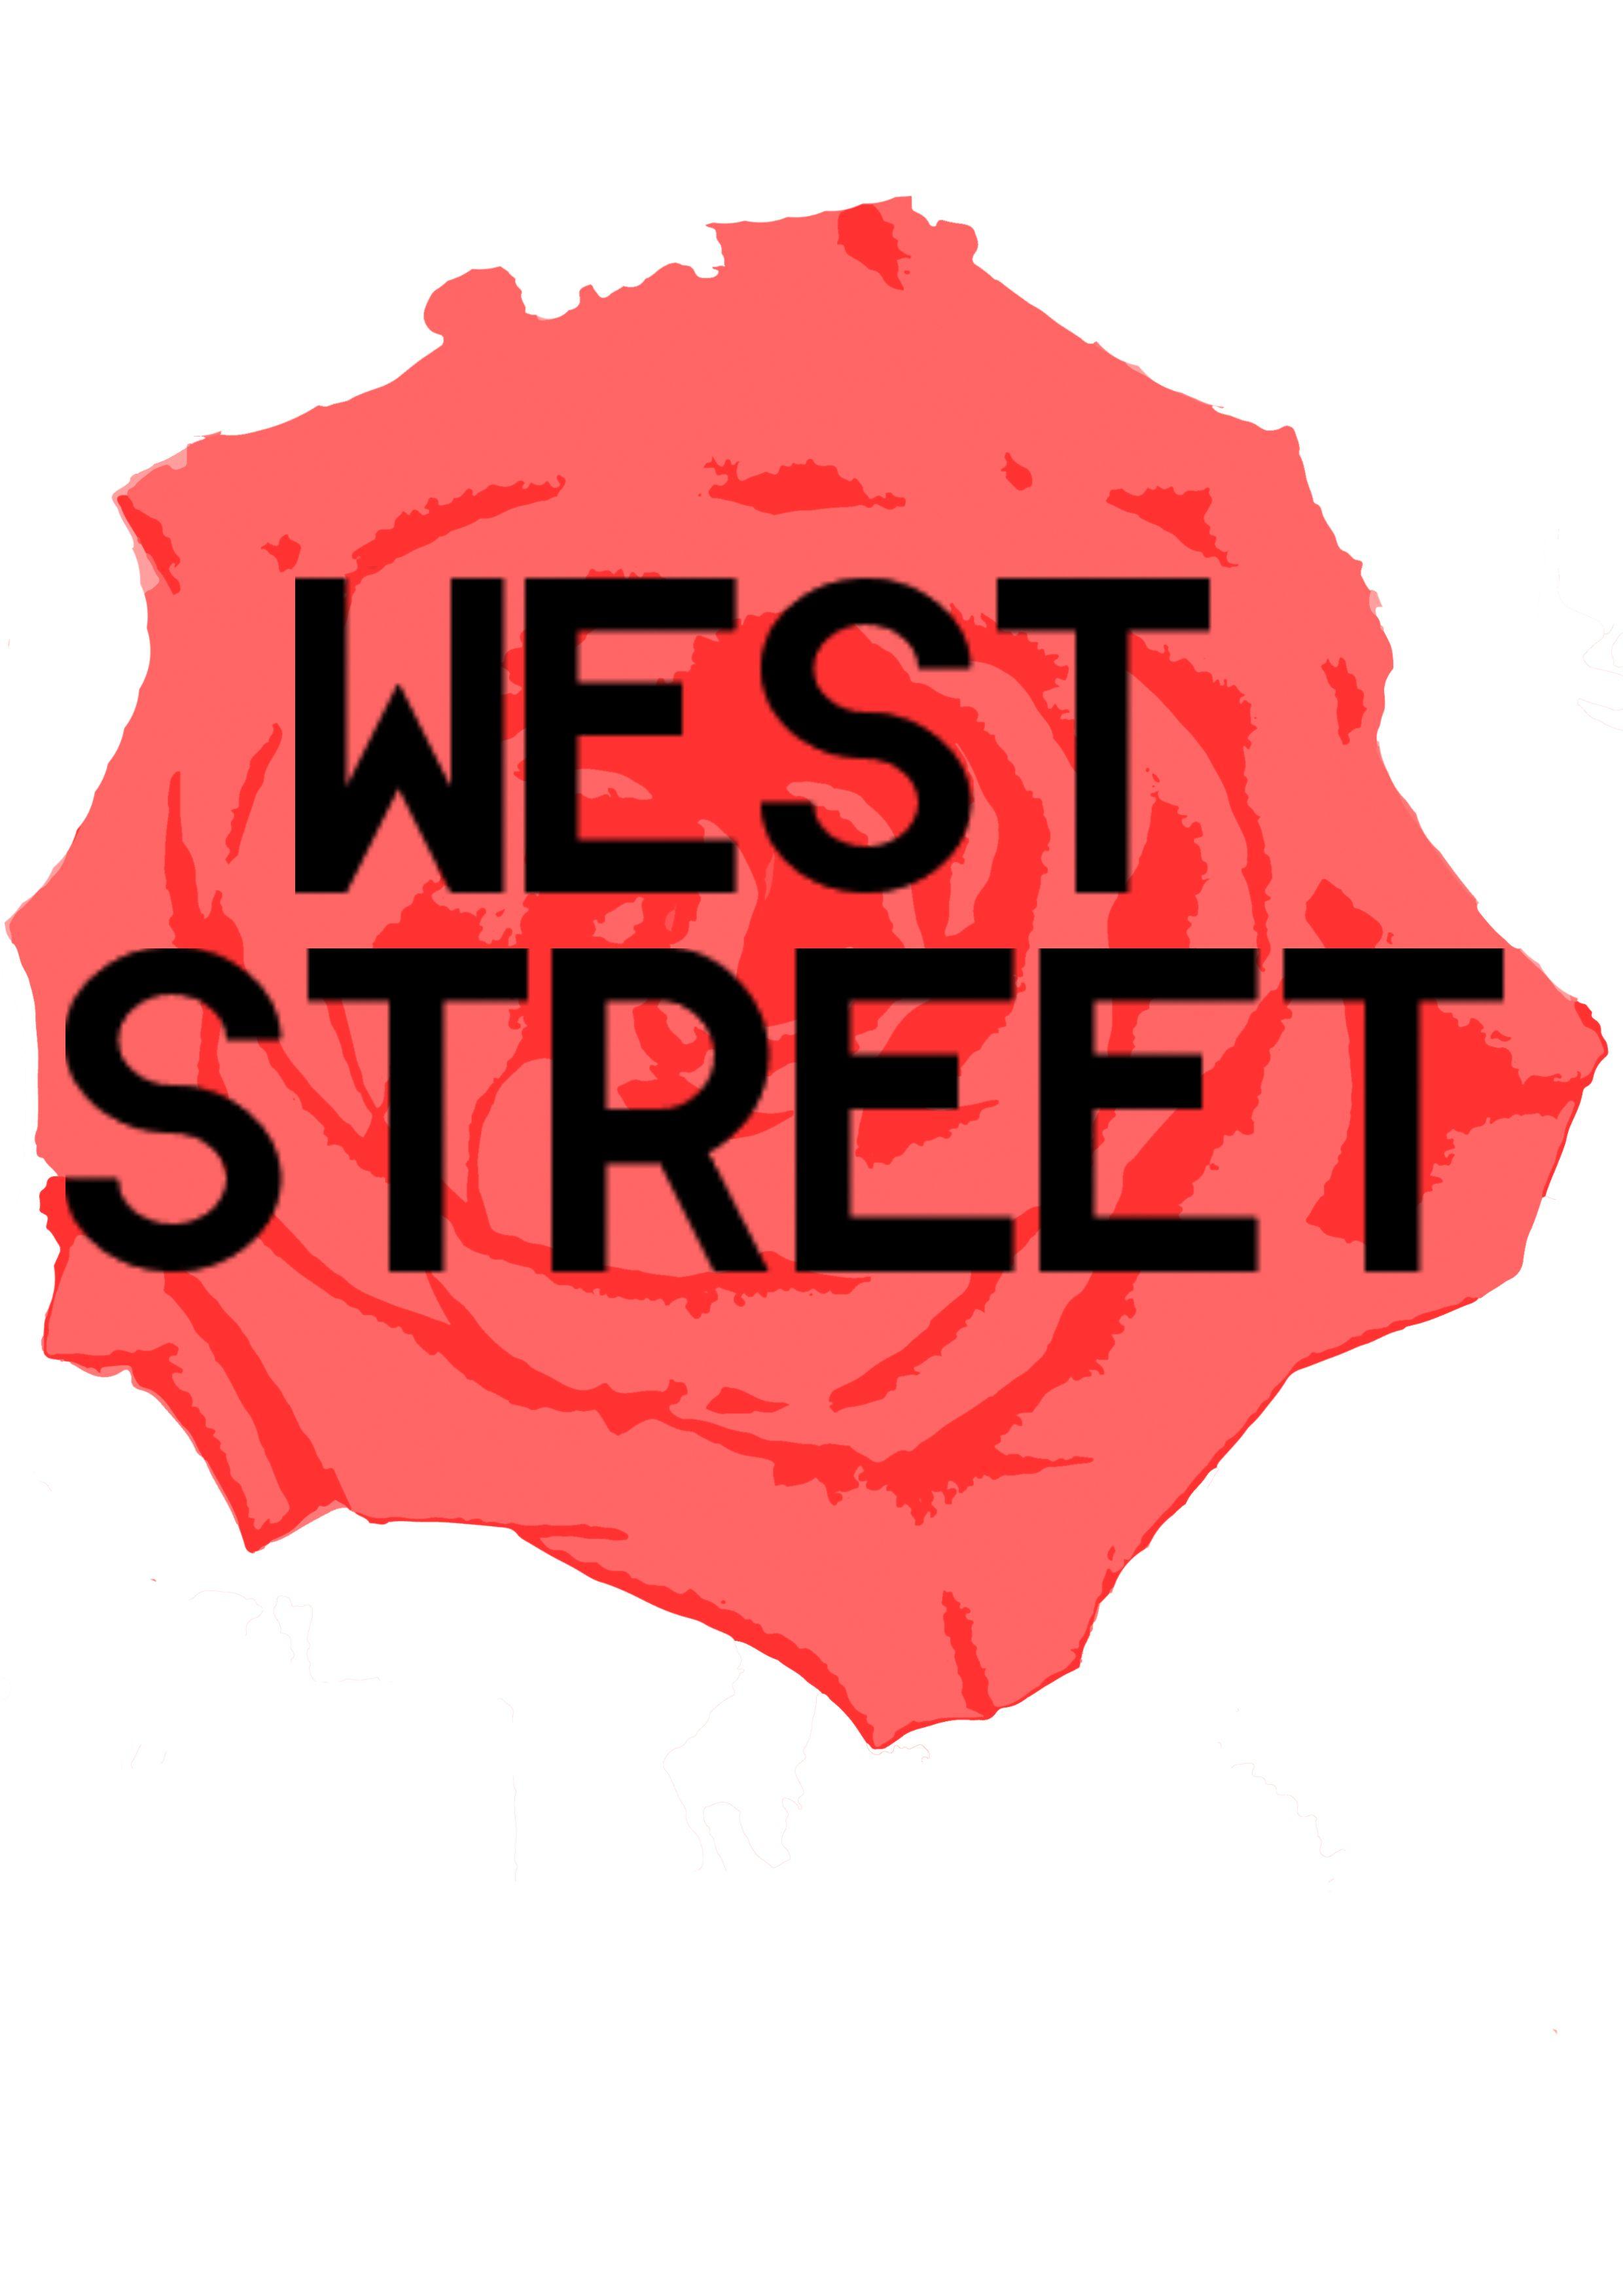 Red Clothes Brand Logo - Personal clothing brand logo. West Street with red rose logo | New ...